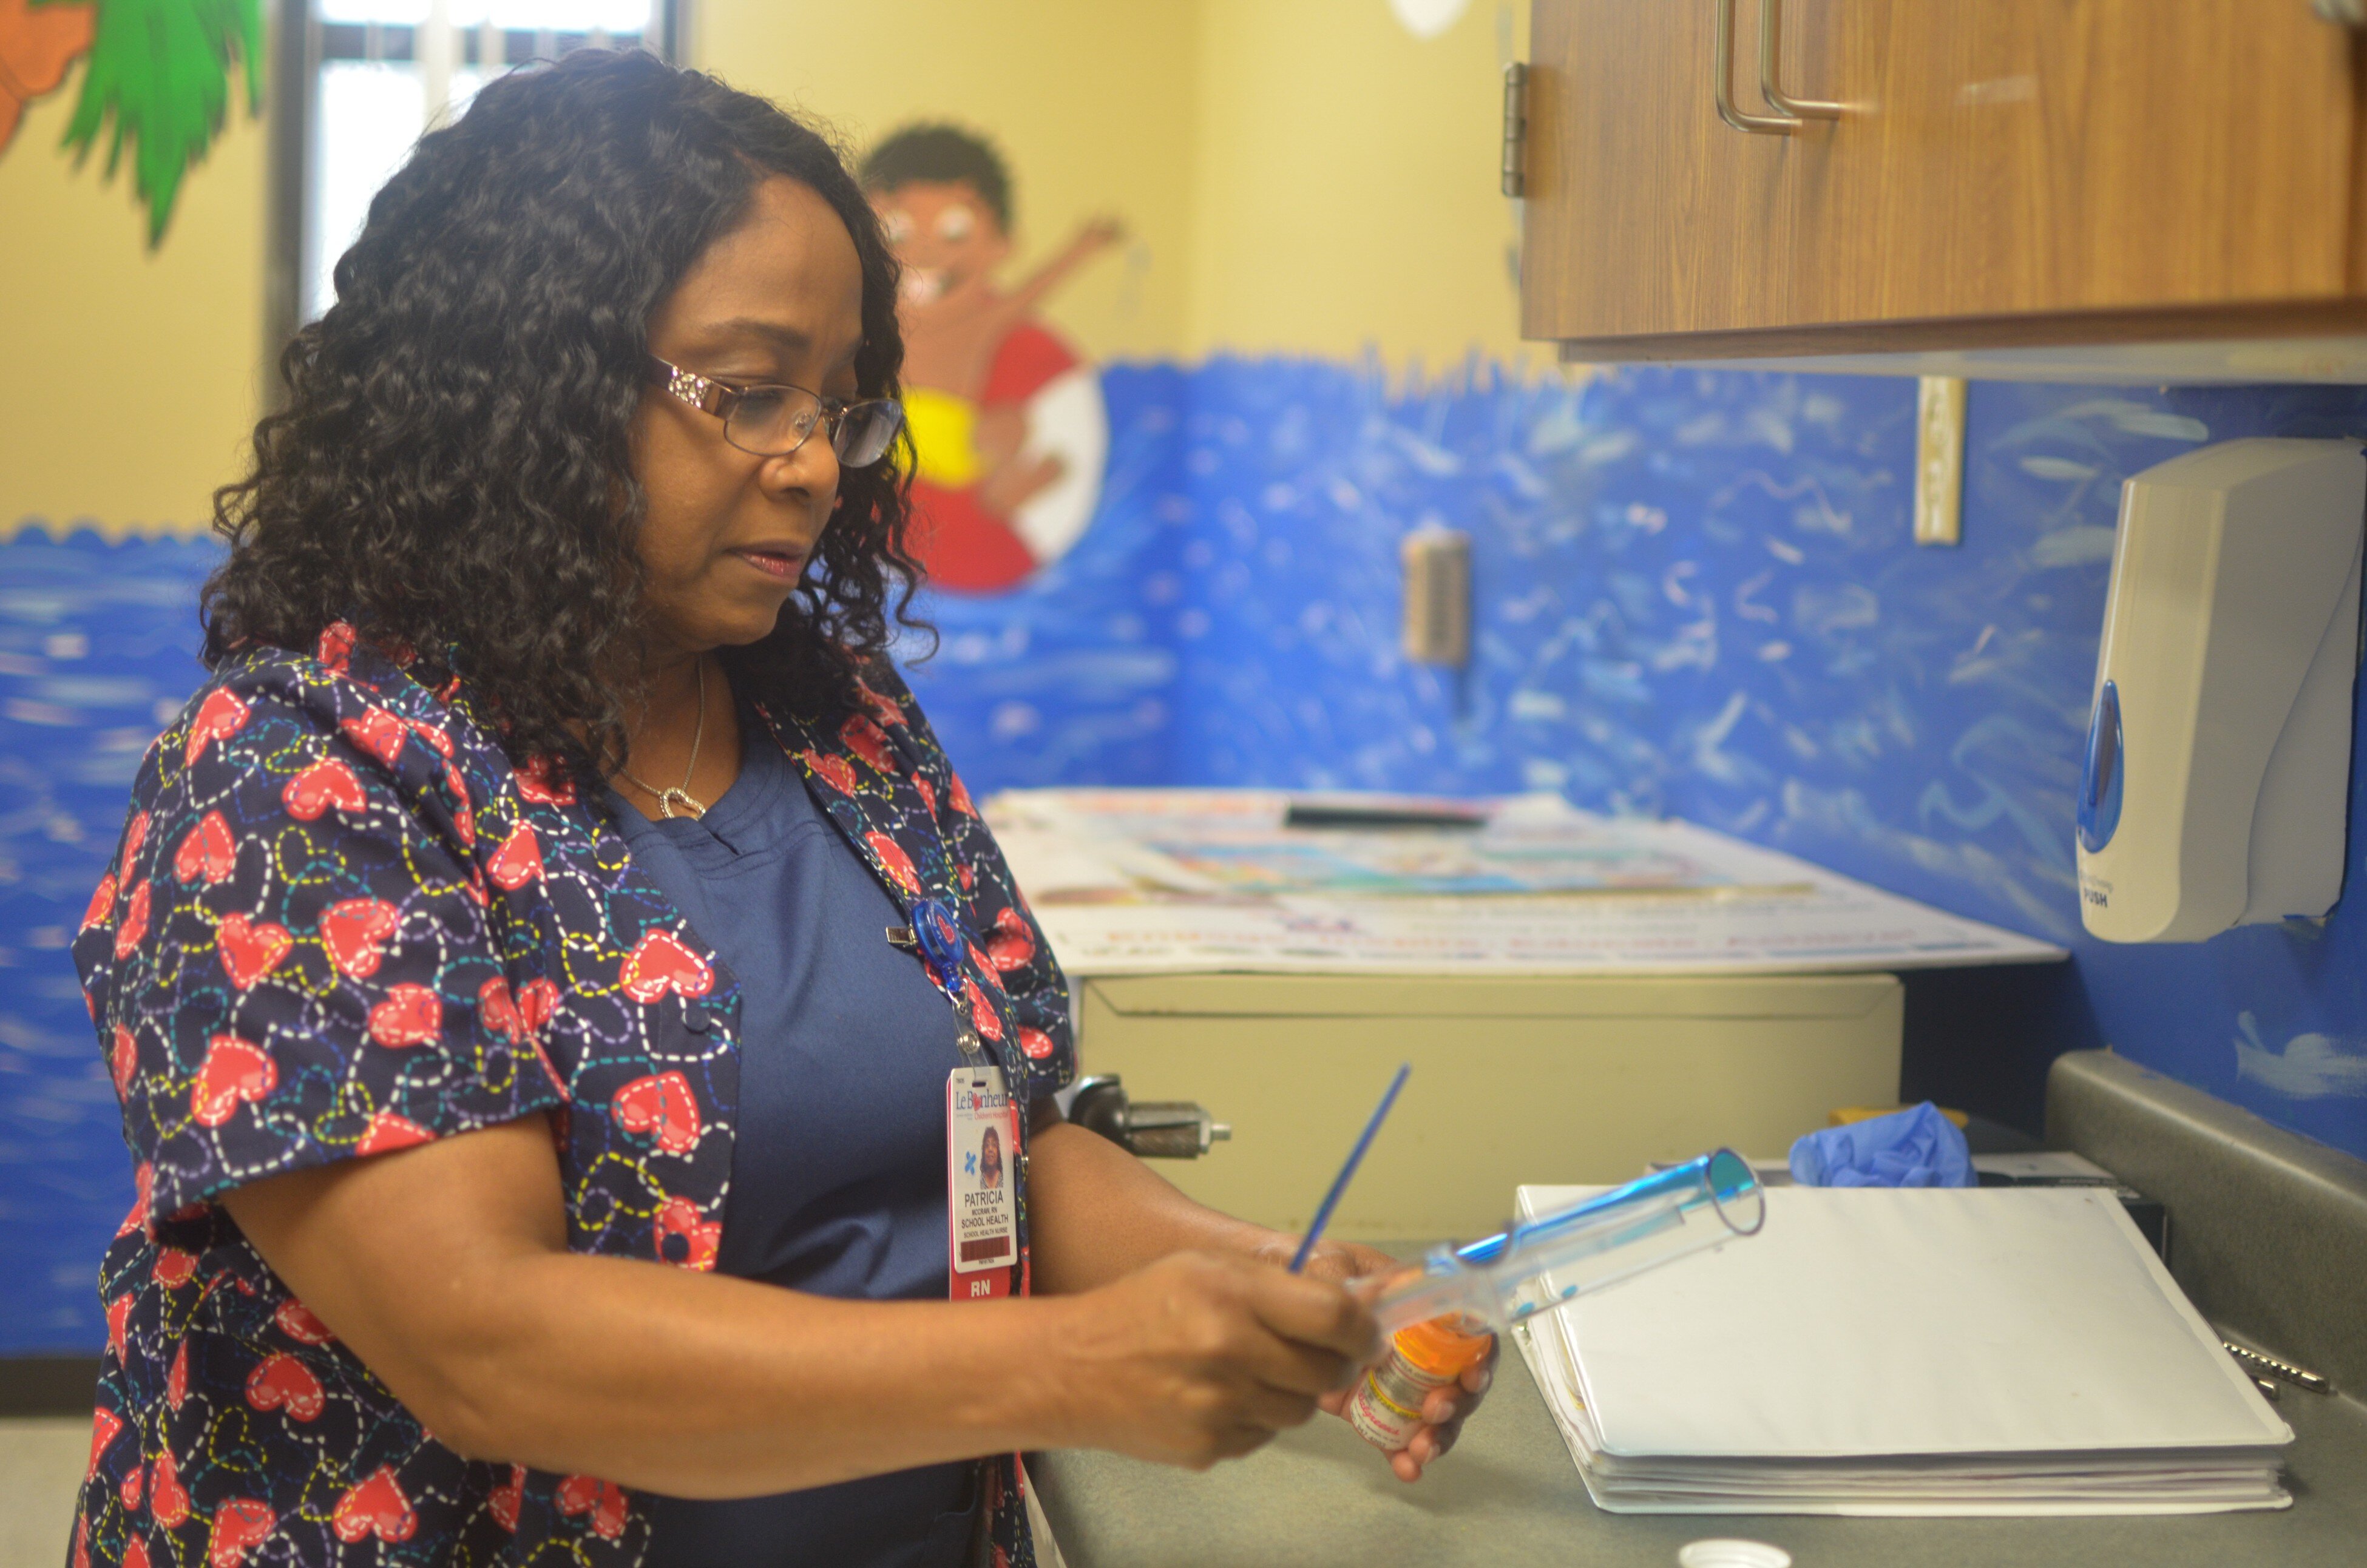 School nurse Patricia McCraw prepares medication for a student at A.B. Hill Elementary. McCraw is part of a school nurse pilot program facilitated by Le Bonheur Children's Hospital, Shelby County Schools and Urban Child Institute. (Cat Evans)